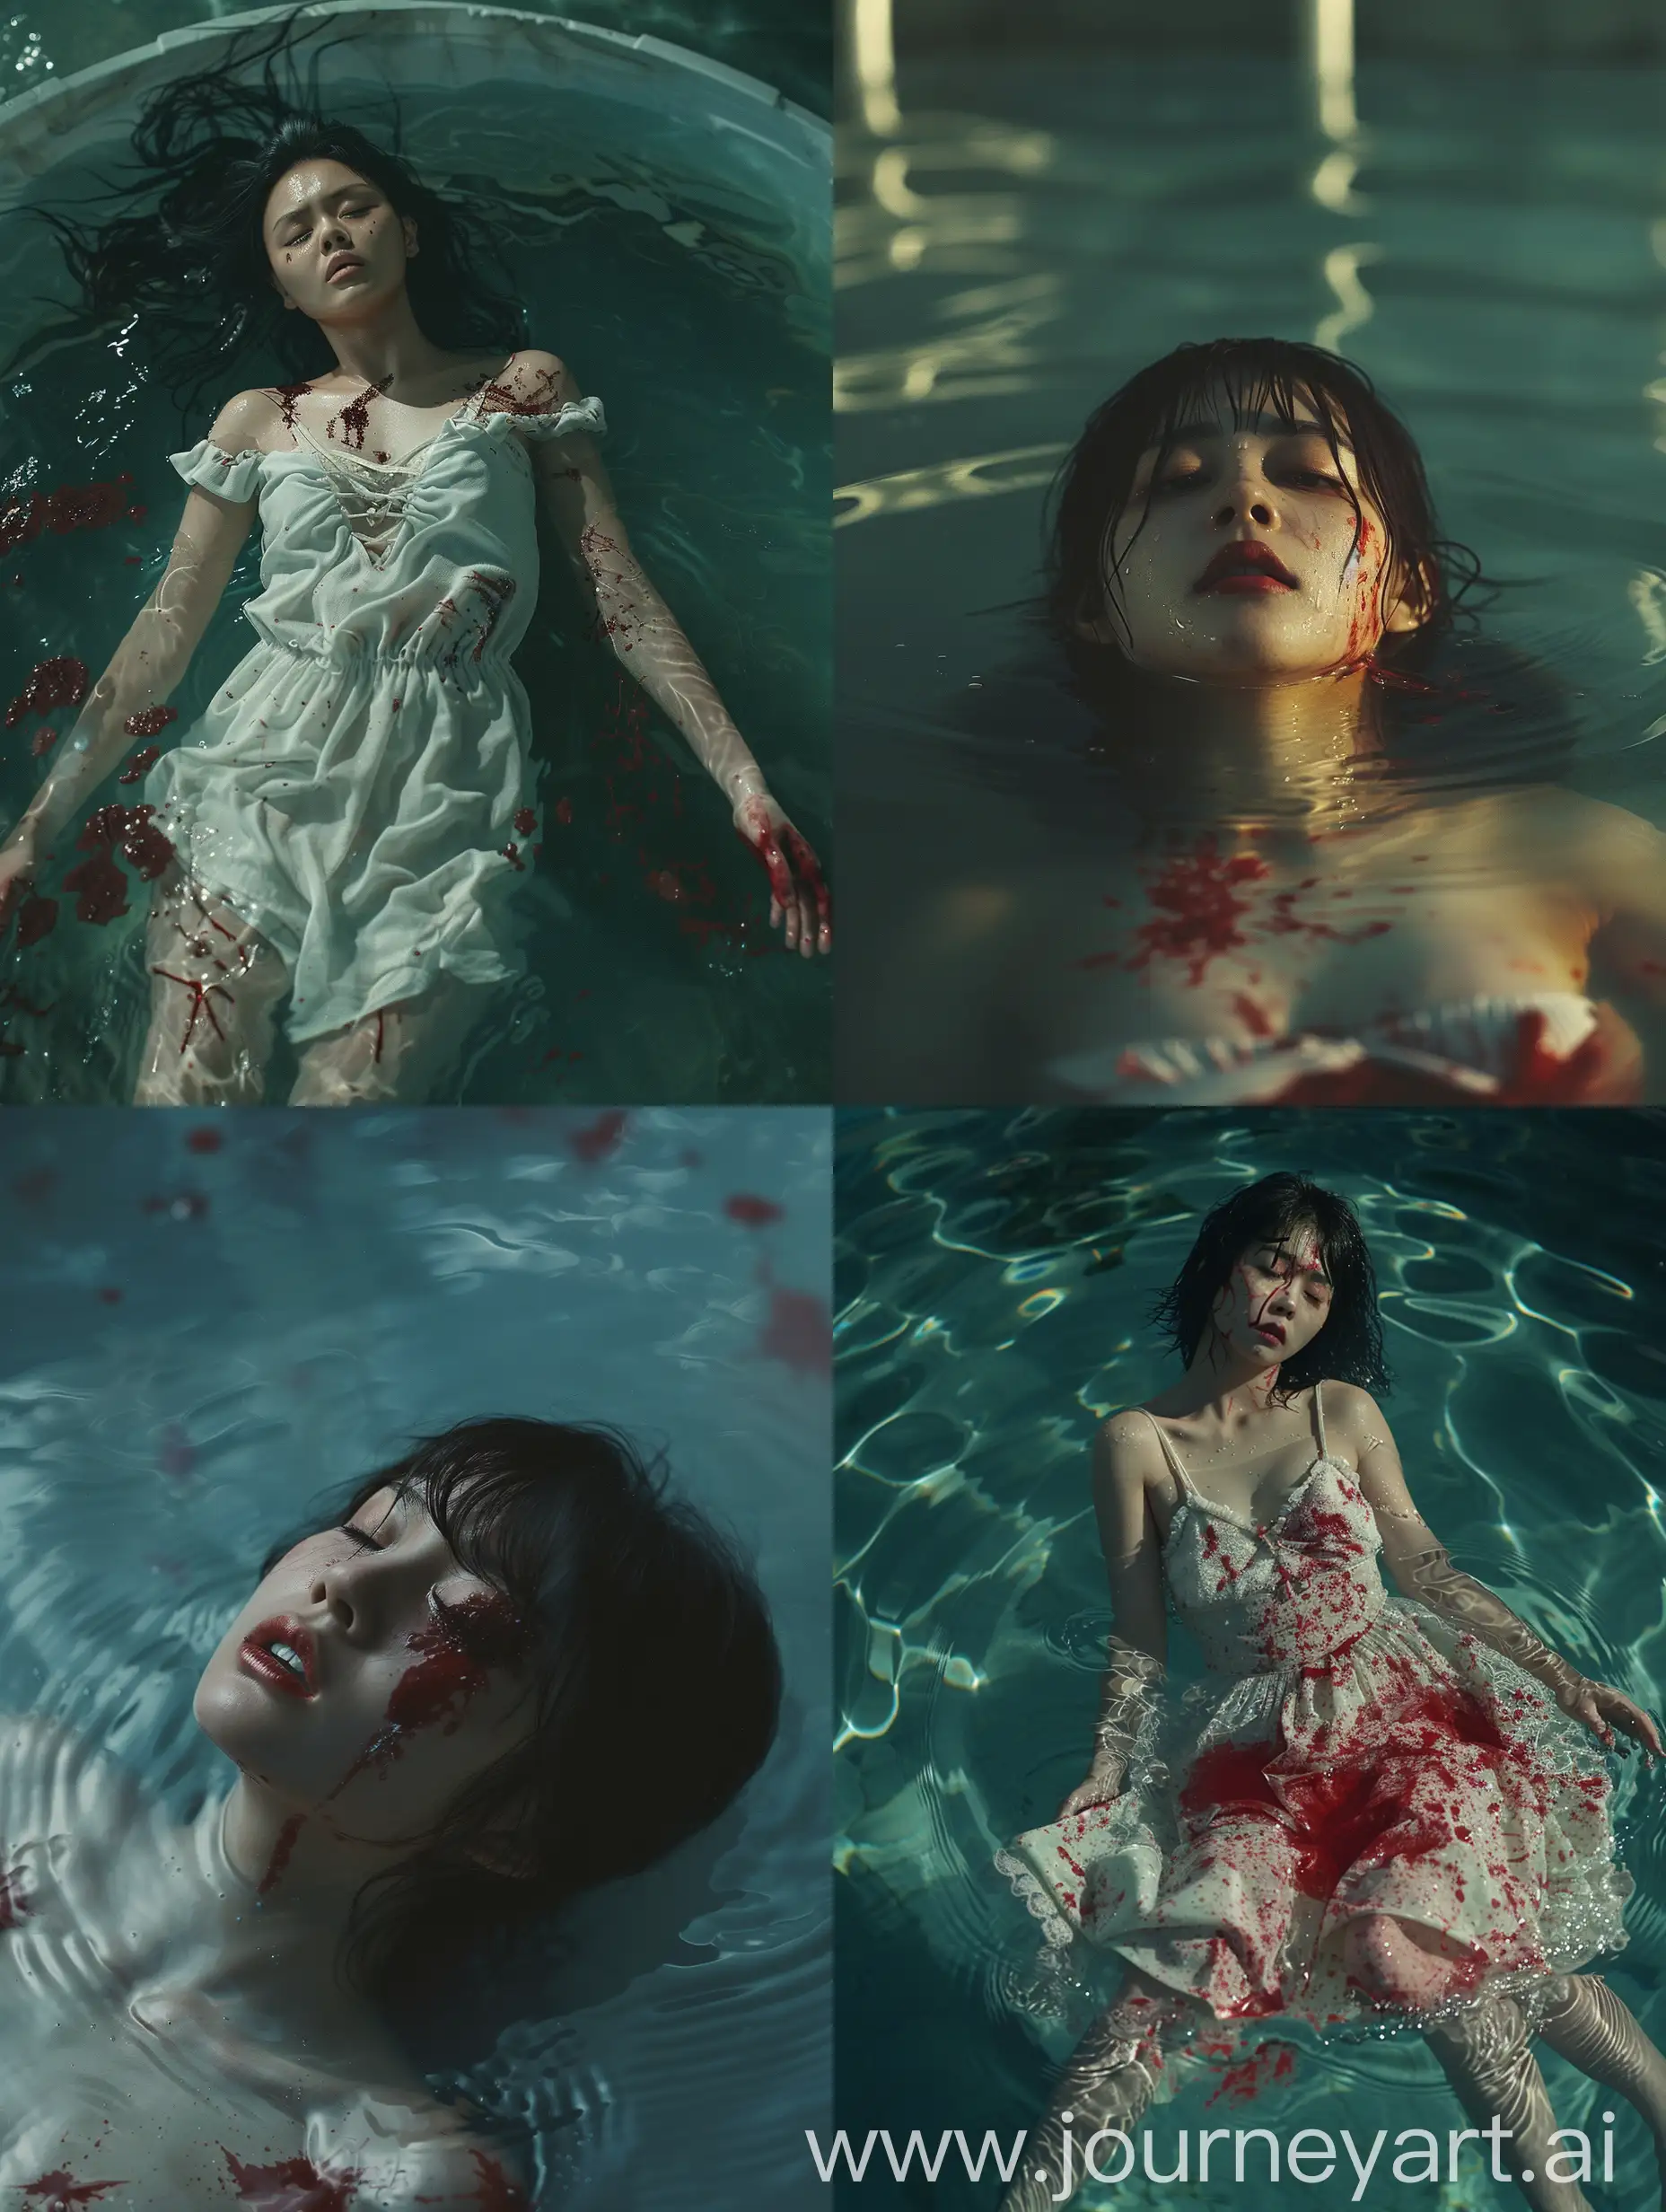 realistic movie stills, full body, full shot, wide shot, Japanese beautiful female, Even in our sleep, pain that cannot forget falls drop by drop upon the heart, and in our own despair, against our will, ultra high-quality photograph, shot on dslr, uncropped, 8k, incredible depth, by shintaro kago, Jeremy Mann, Ismail Inceoglu, Injured, floating, water stained with blood, realism, clear light and shadow, movie texture, film photos, expired film, creating a melancholy atmosphere , aesthetics of violence, an amazing movie scene, strong dramatic tension, rich details, clear light and shadow, a strong sense of cinema

